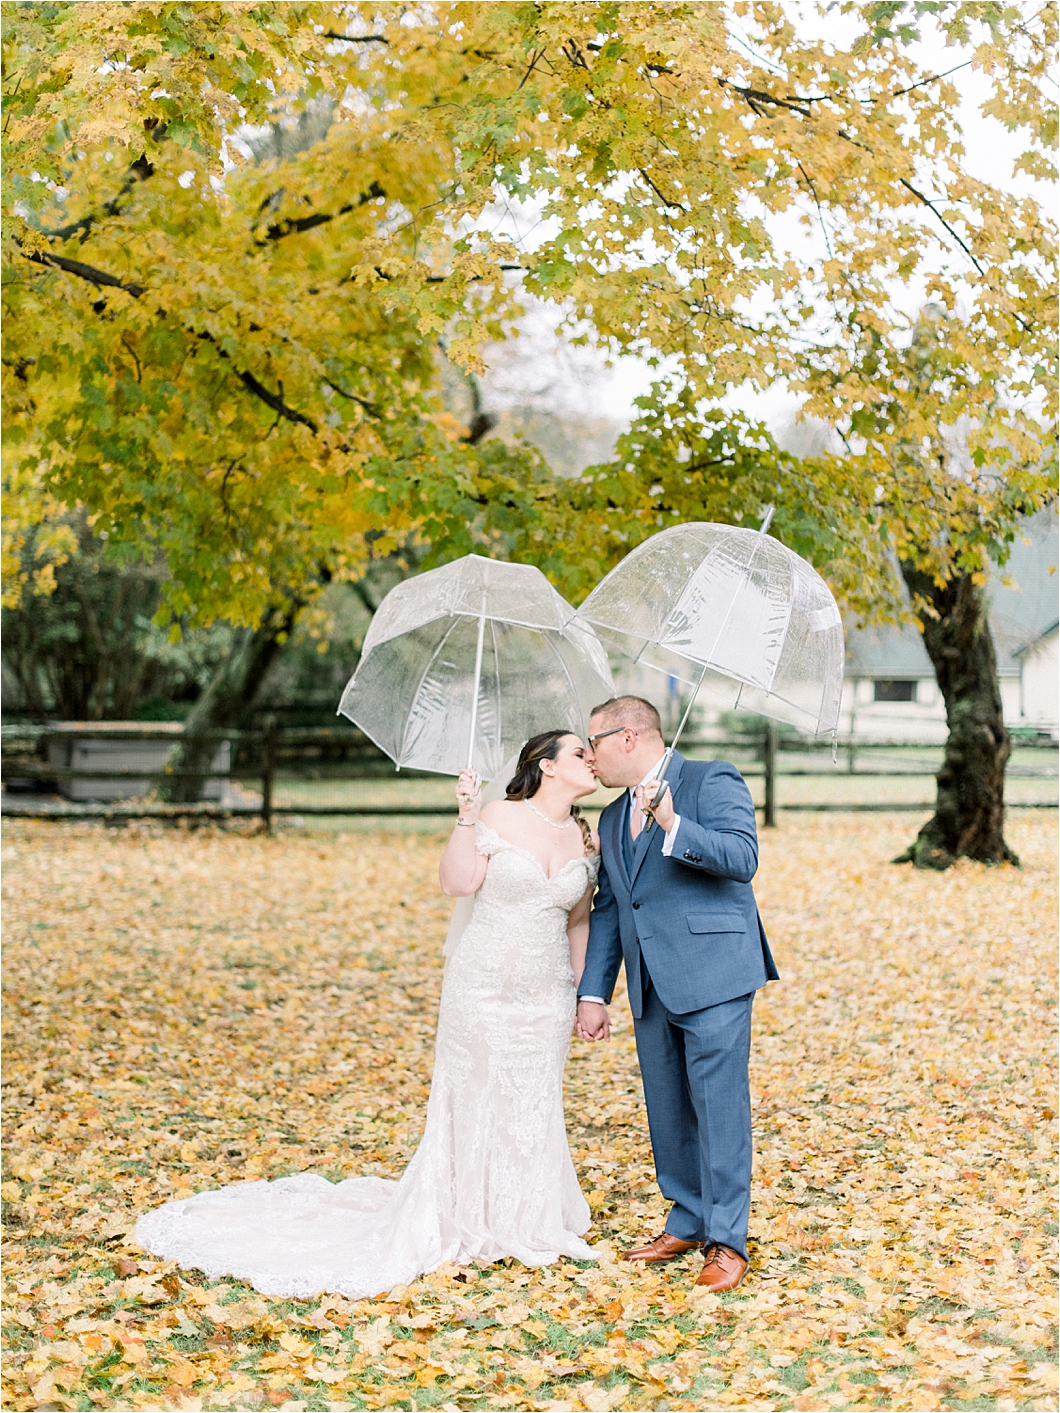 Rainy Wedding Day Tips for Brides and Grooms